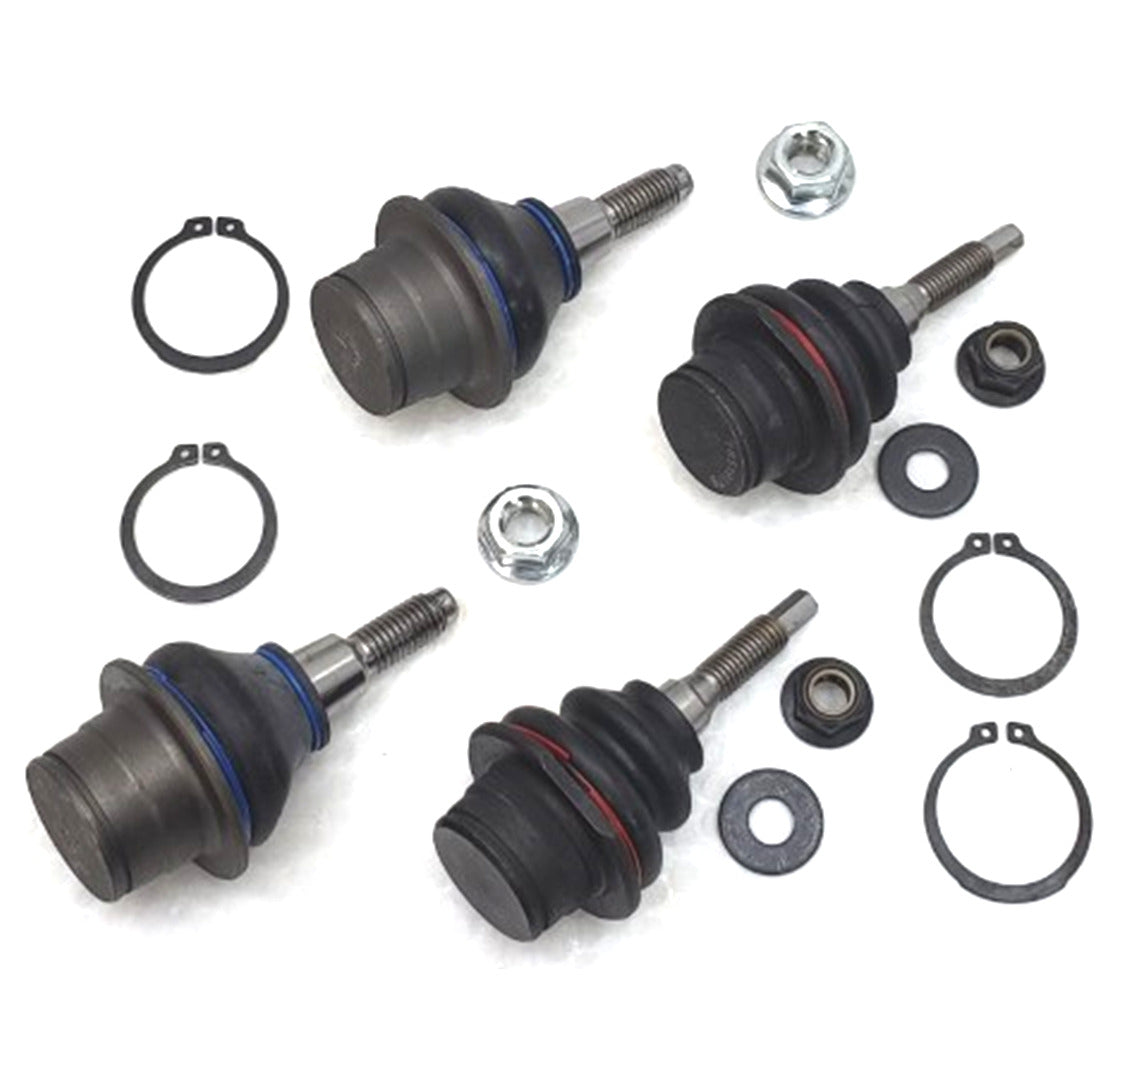 Lifetime Ball Joints Upper Lower Suspension Kit for 2018-2021 Ford Expedition 2WD